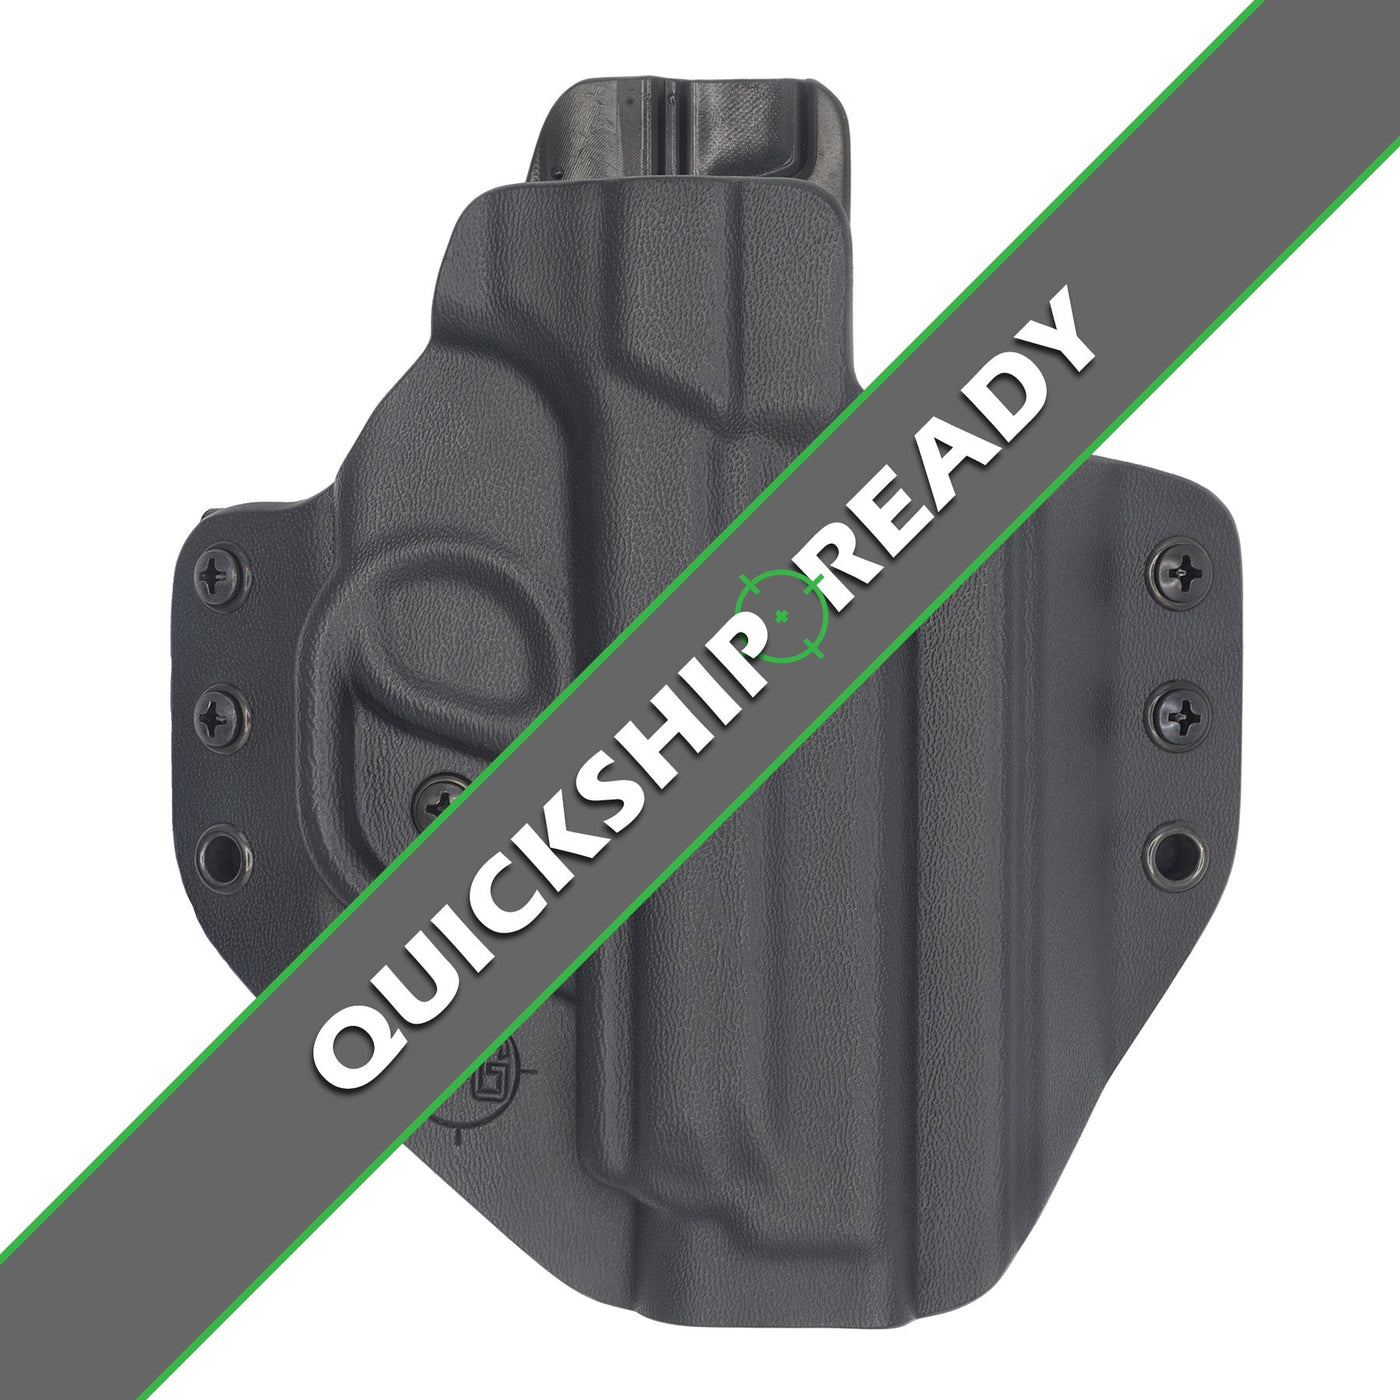 C&G Holsters quick ship Covert OWB kydex holster for Smith & Wesson M&P 2.0 9/40